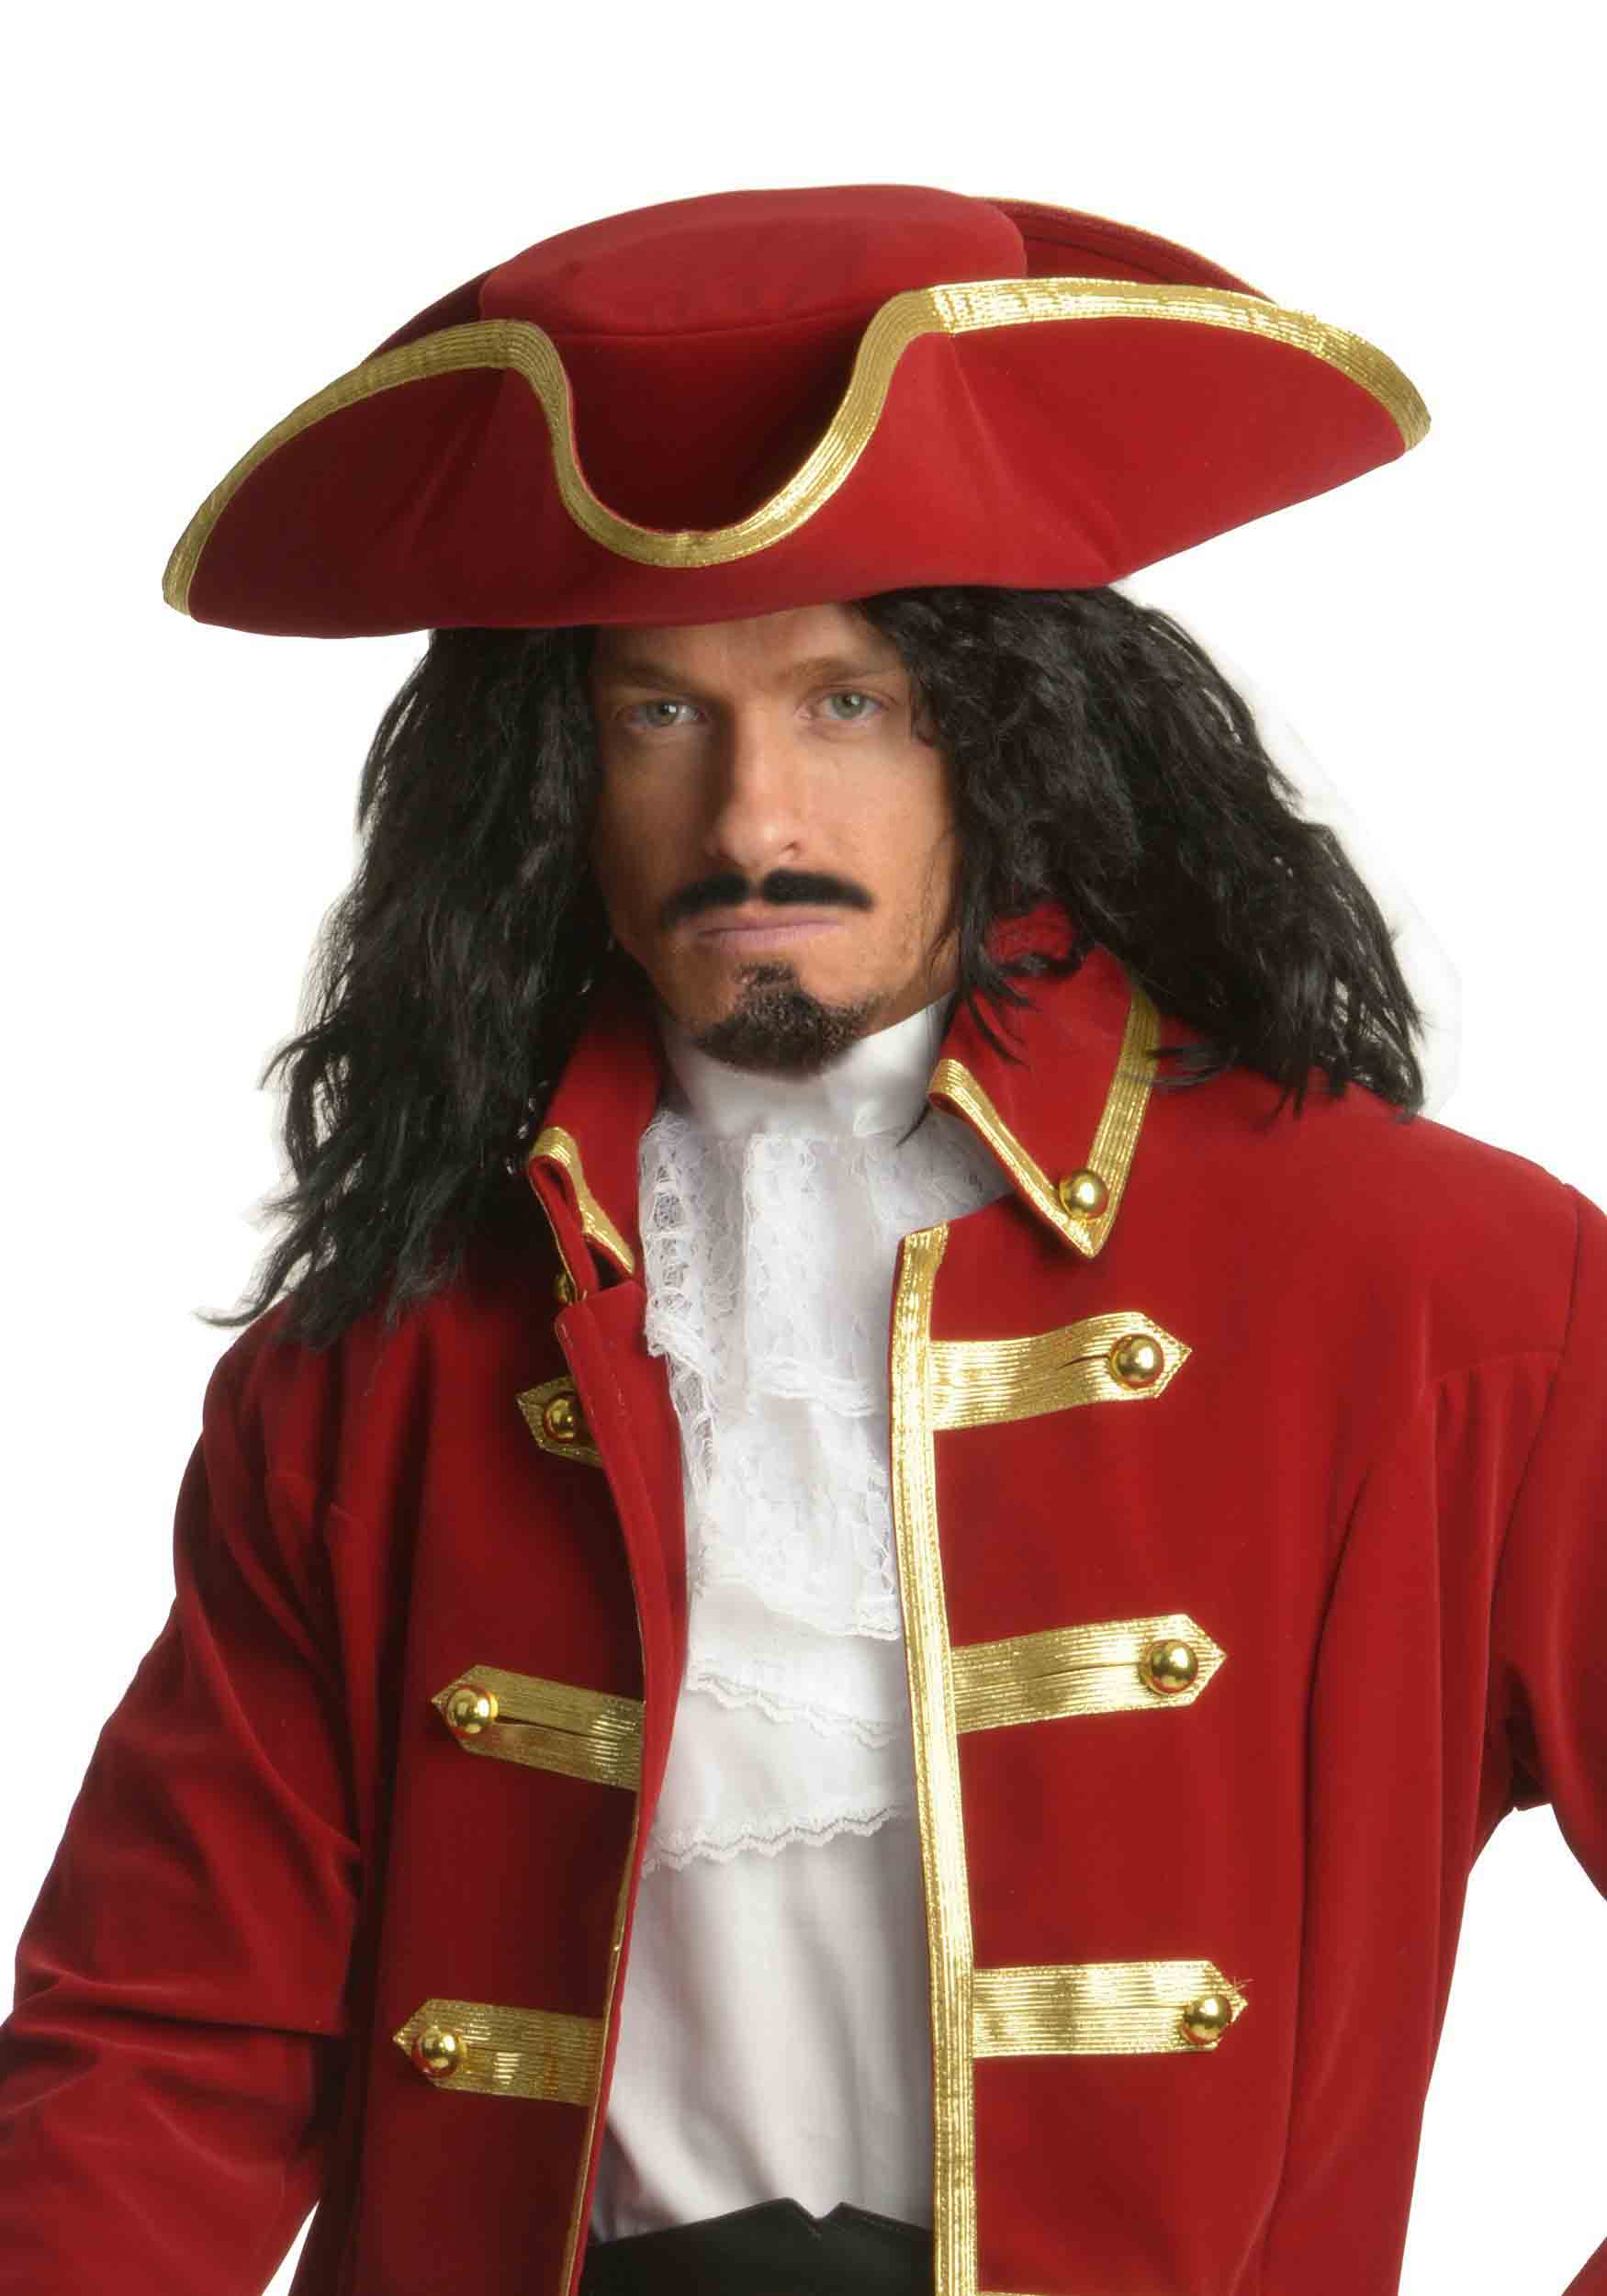 Pirate Halloween Costume Ideas For Men With Long Hair - EntertainmentMesh.